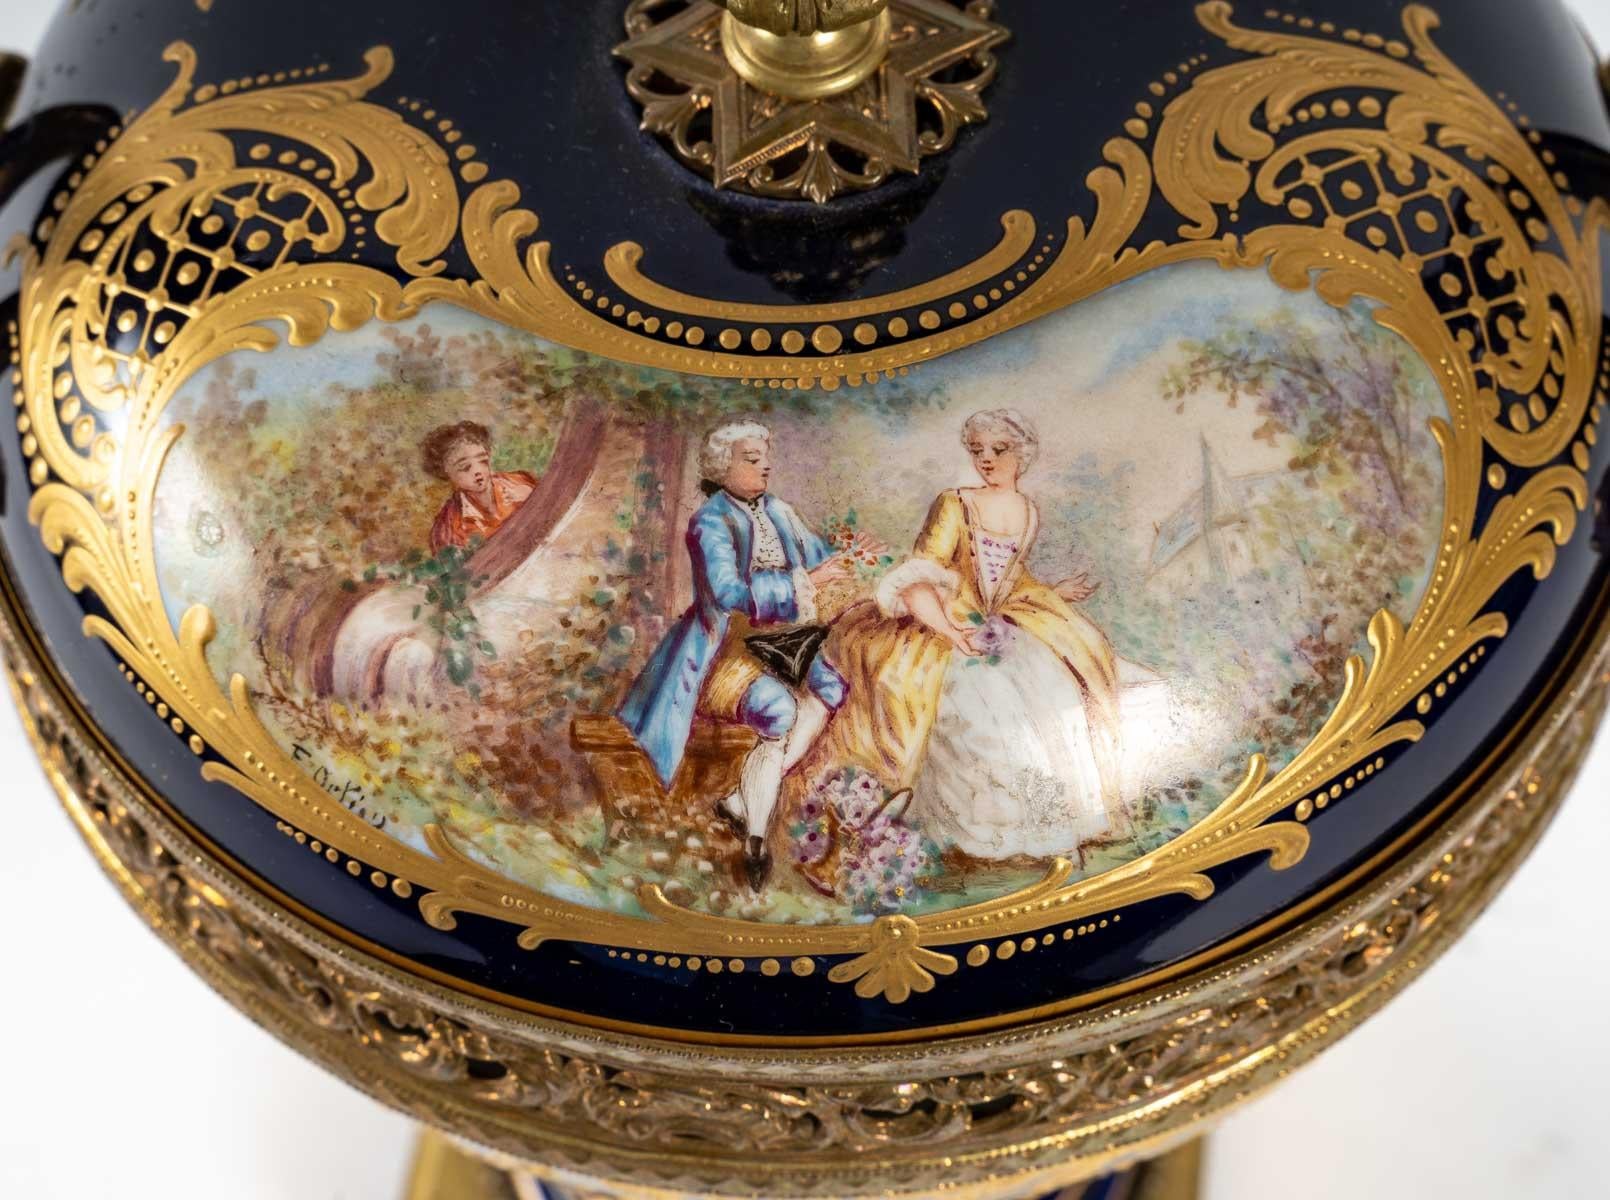 A royal blue Sèvres porcelain bonbonniere, richly decorated with gold and a gallant scene, mounted in gilt bronze, 19th century, Napoleon III period. Stamps of the Tuileries castle and Sèvres castle.